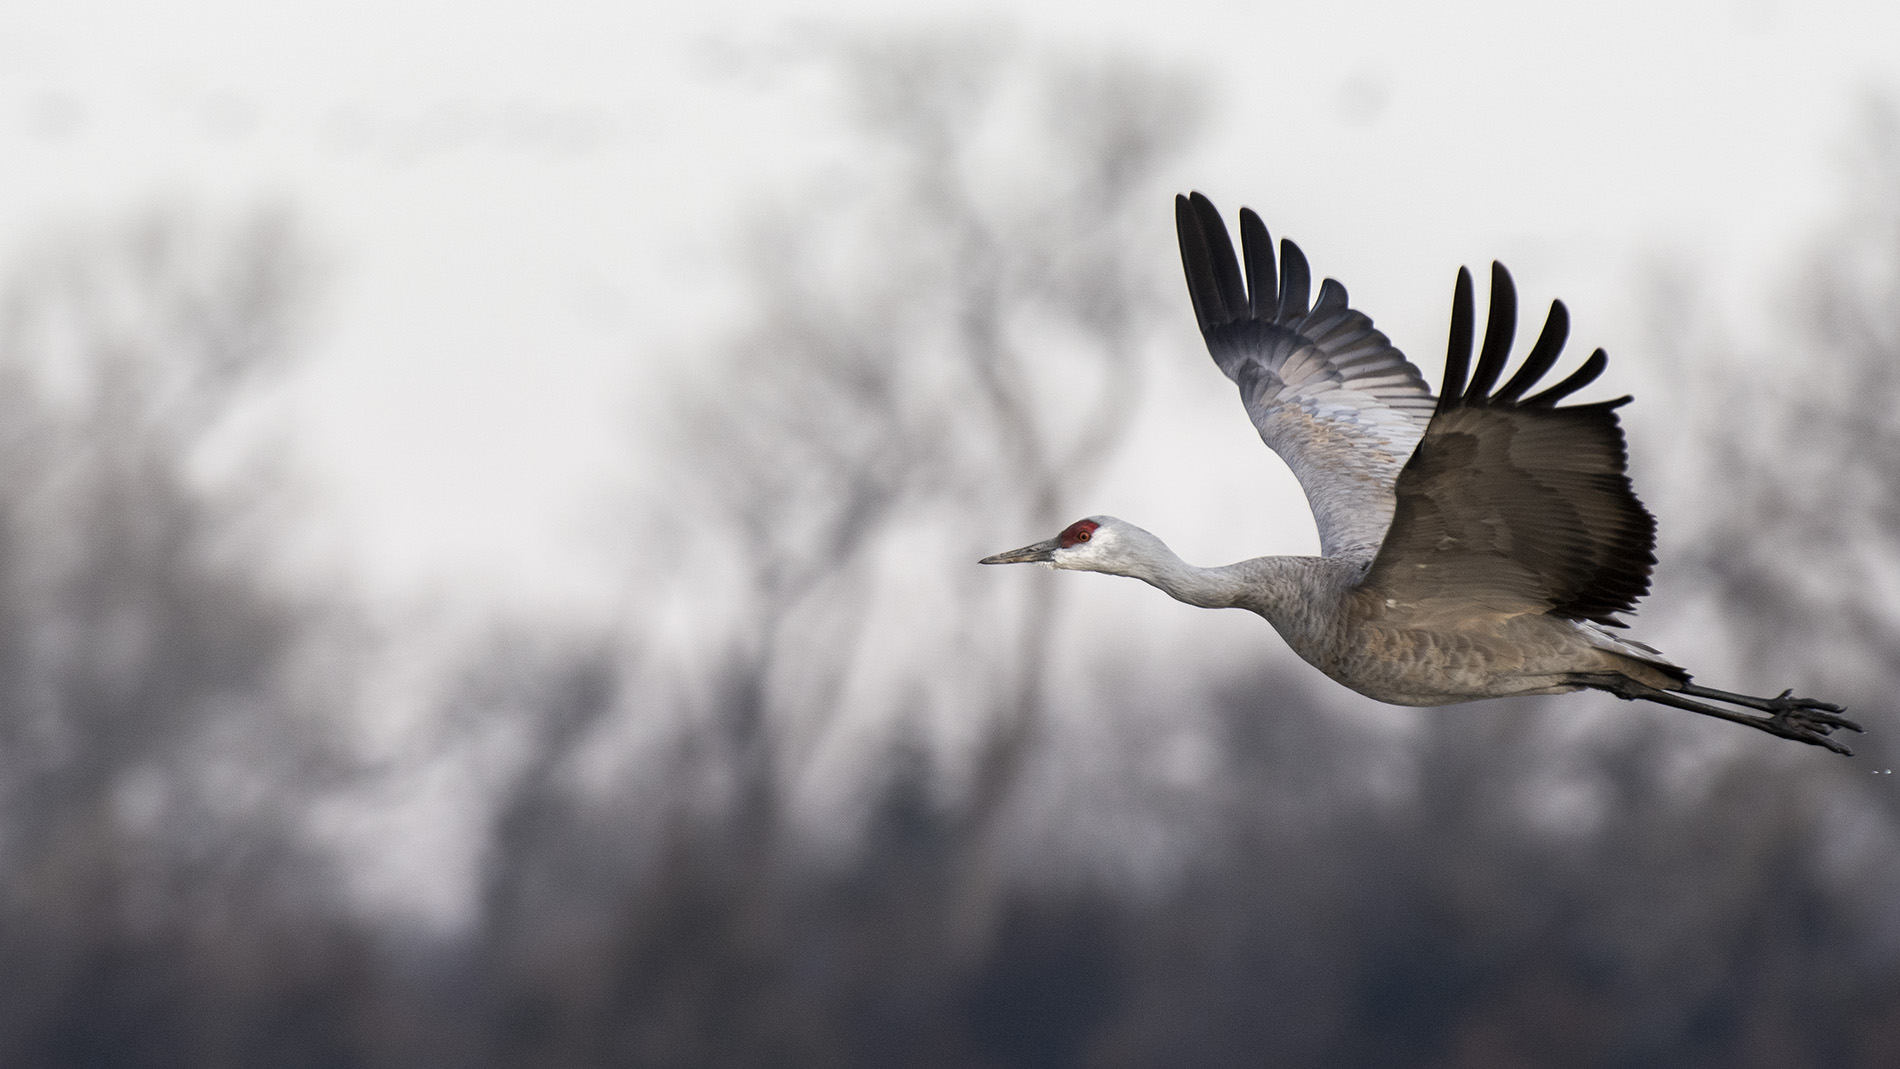 Sandhill cranes fly from their roost on the Platte River